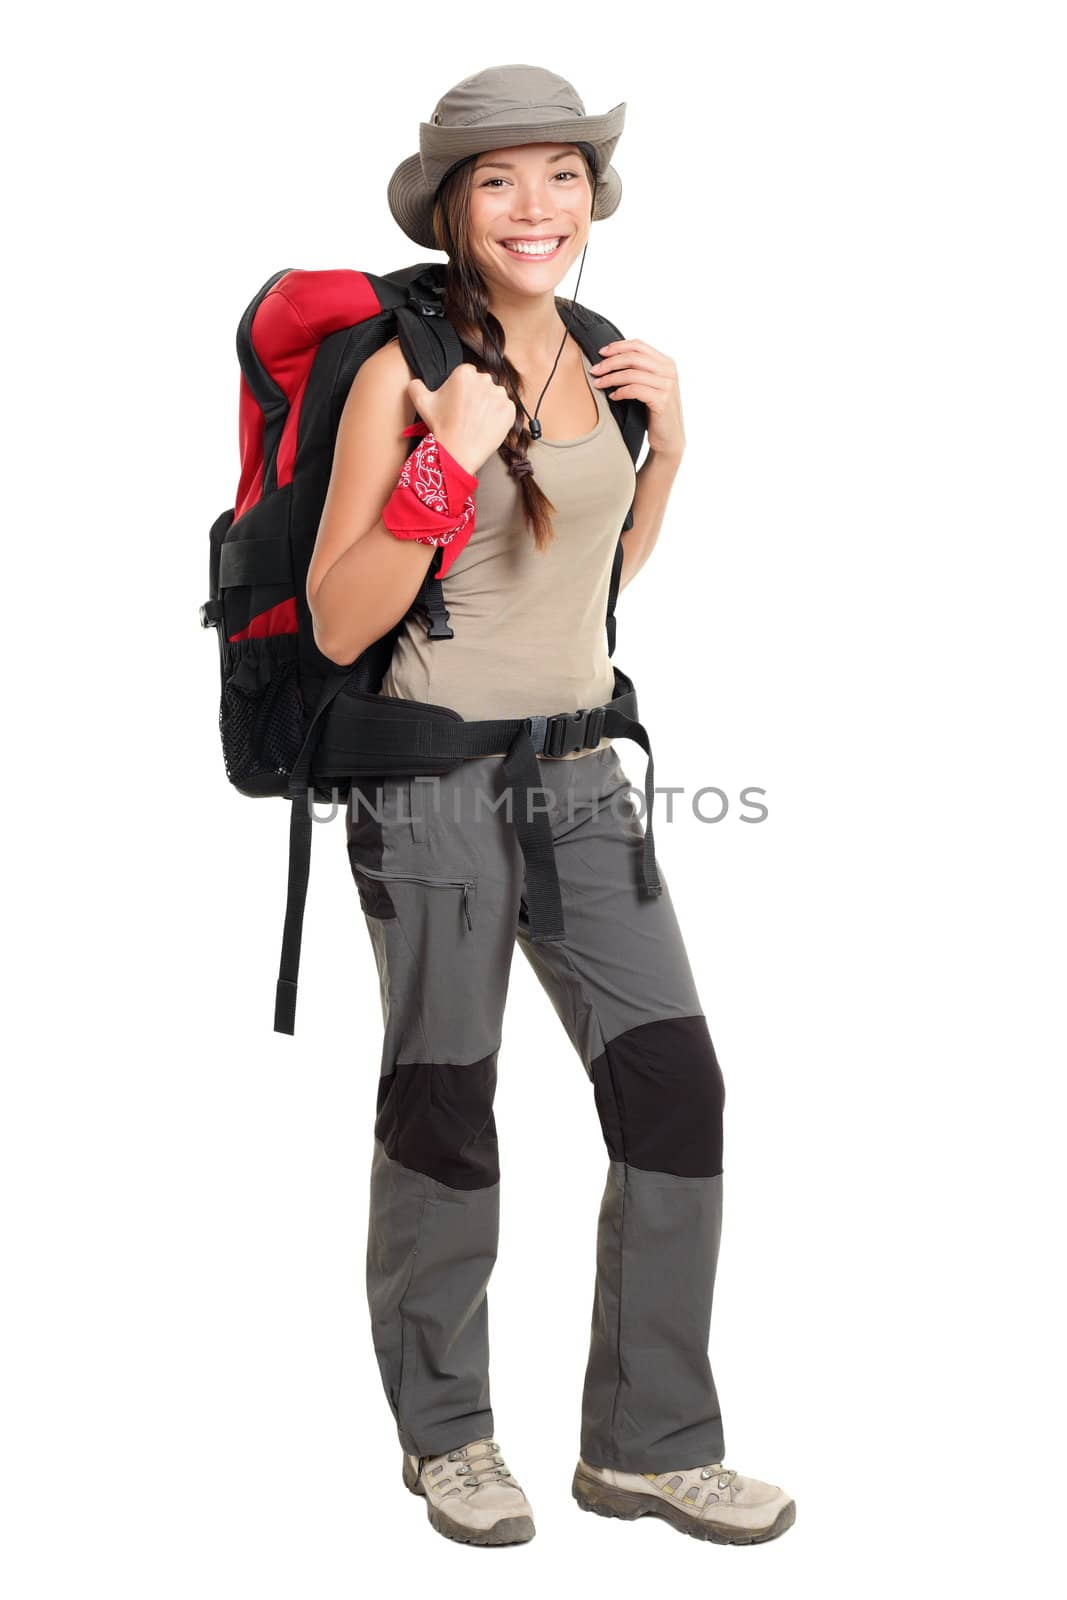 Hiker woman isolated on white background standing in full length. Beautiful Mixed race Asian / Caucasian female in outdoors hiking outfit.